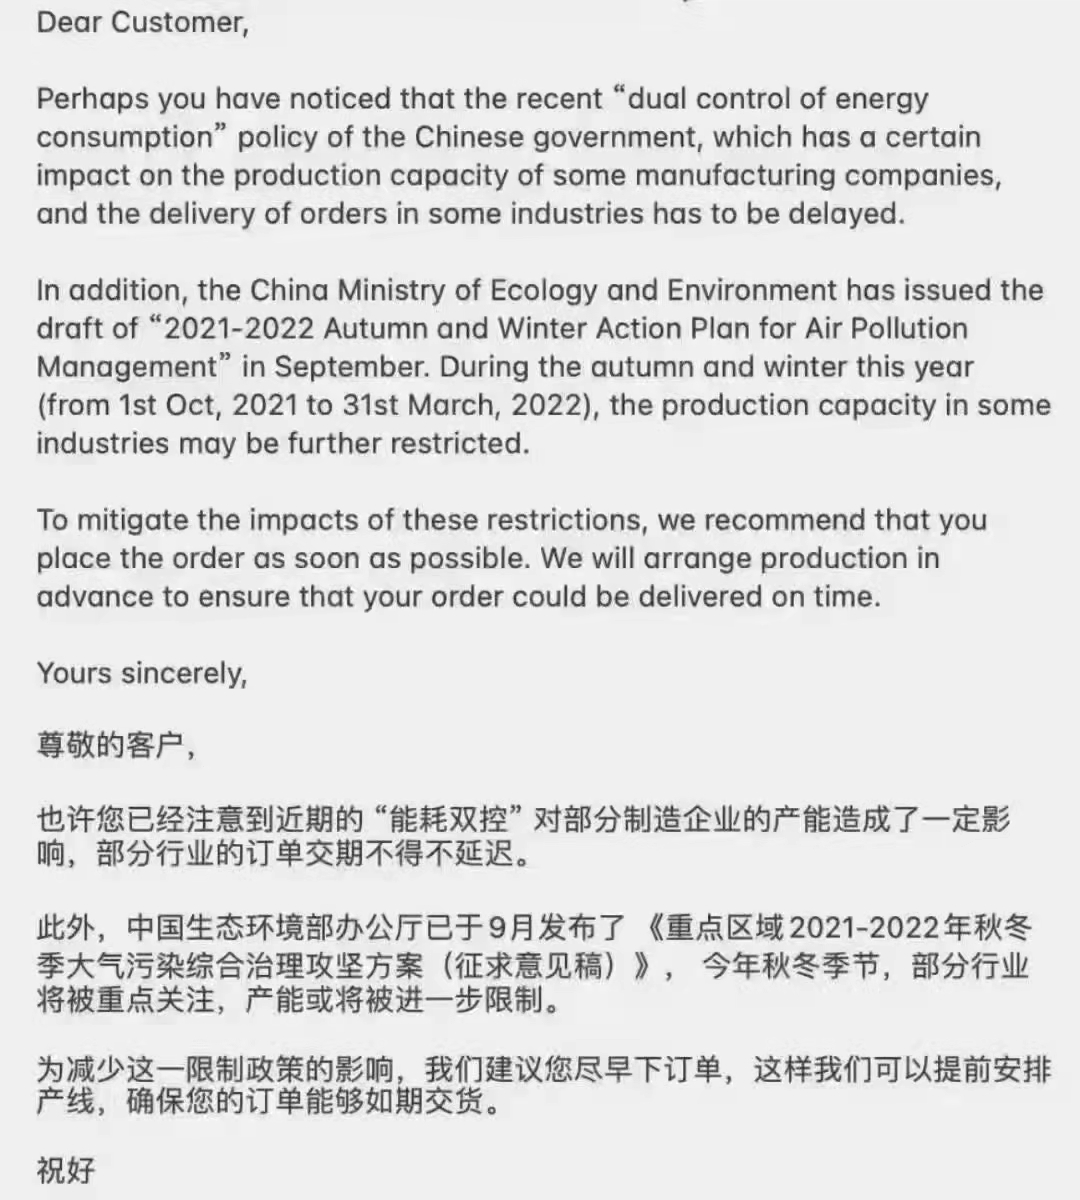 China's strictest industrial electricity curtailment policy and environmental protection policy